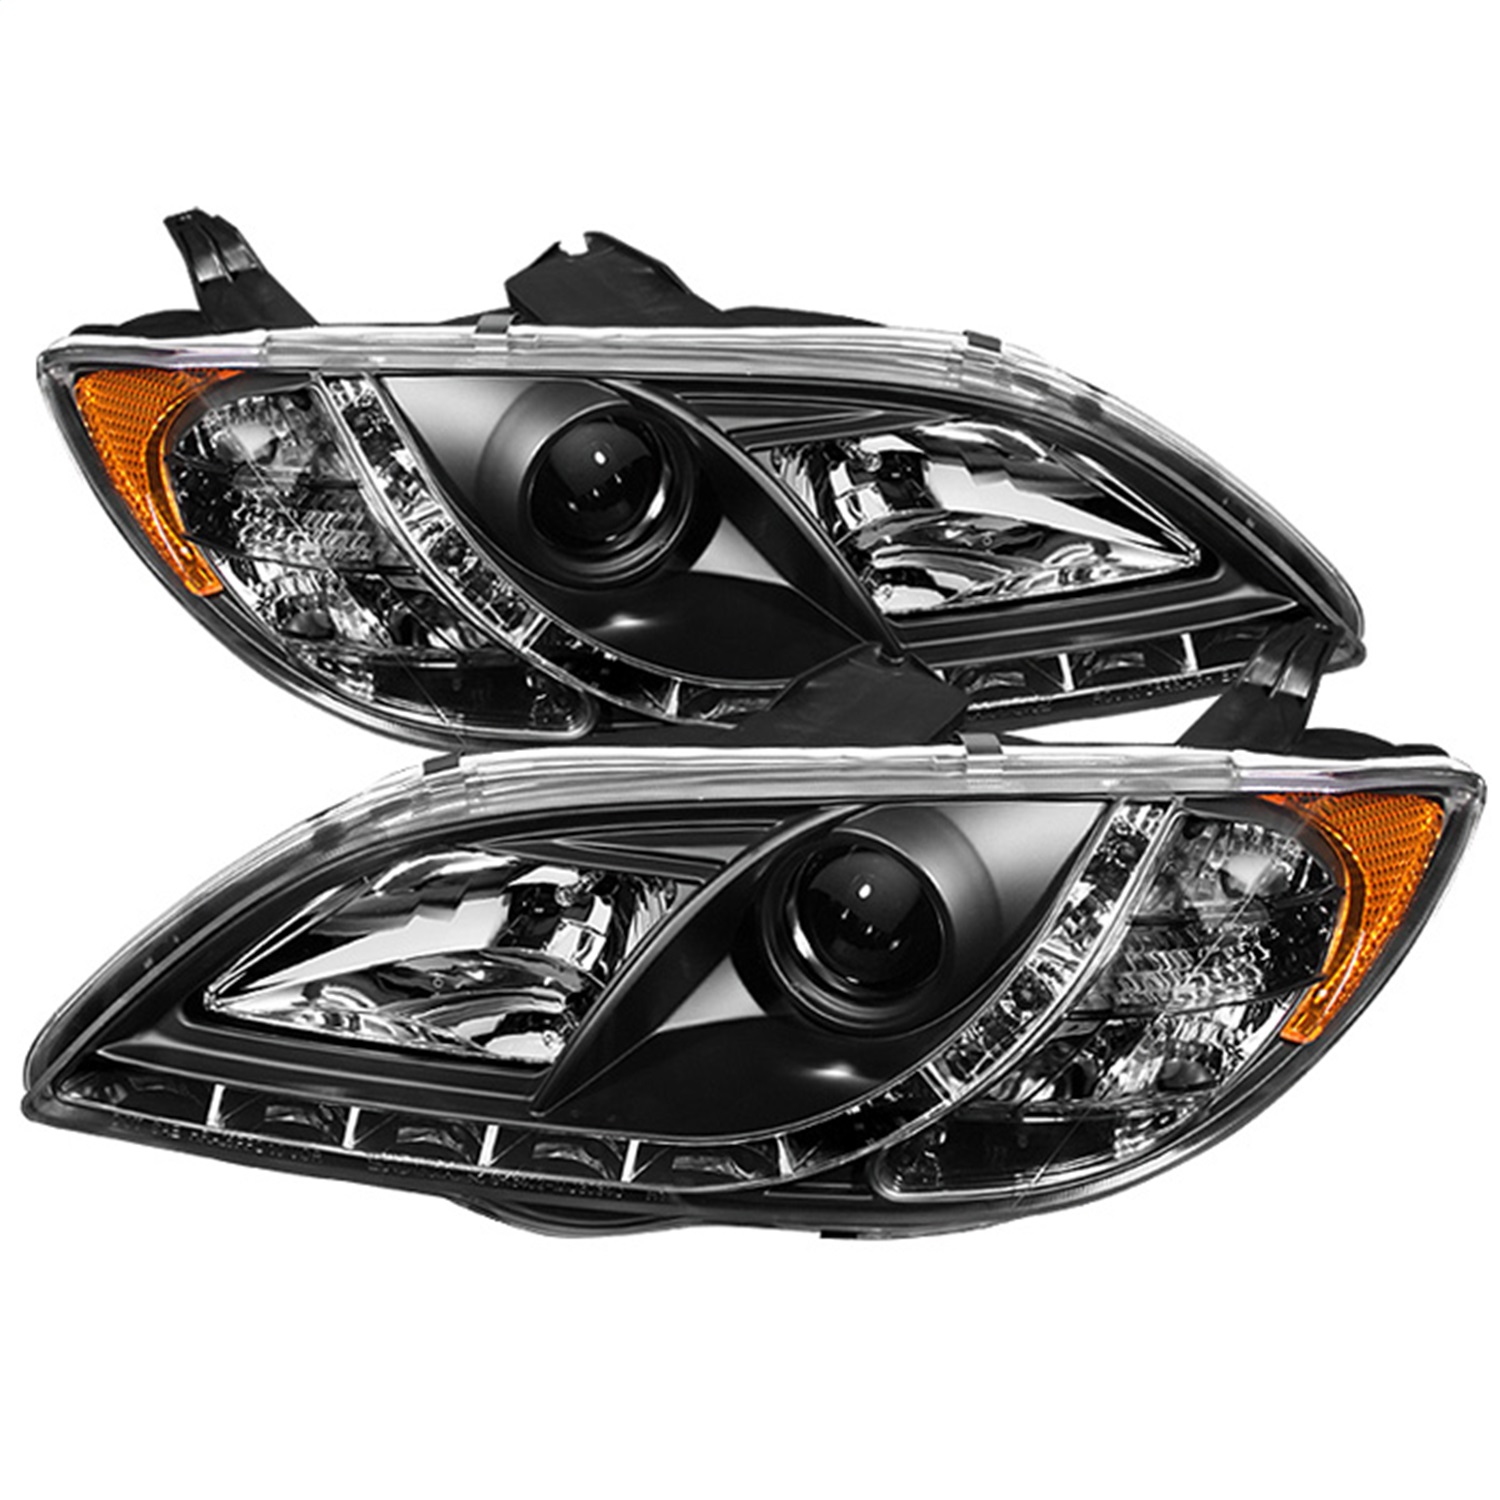 Spyder Auto 5017451 DRL LED Projector Headlights Fits 04-08 3